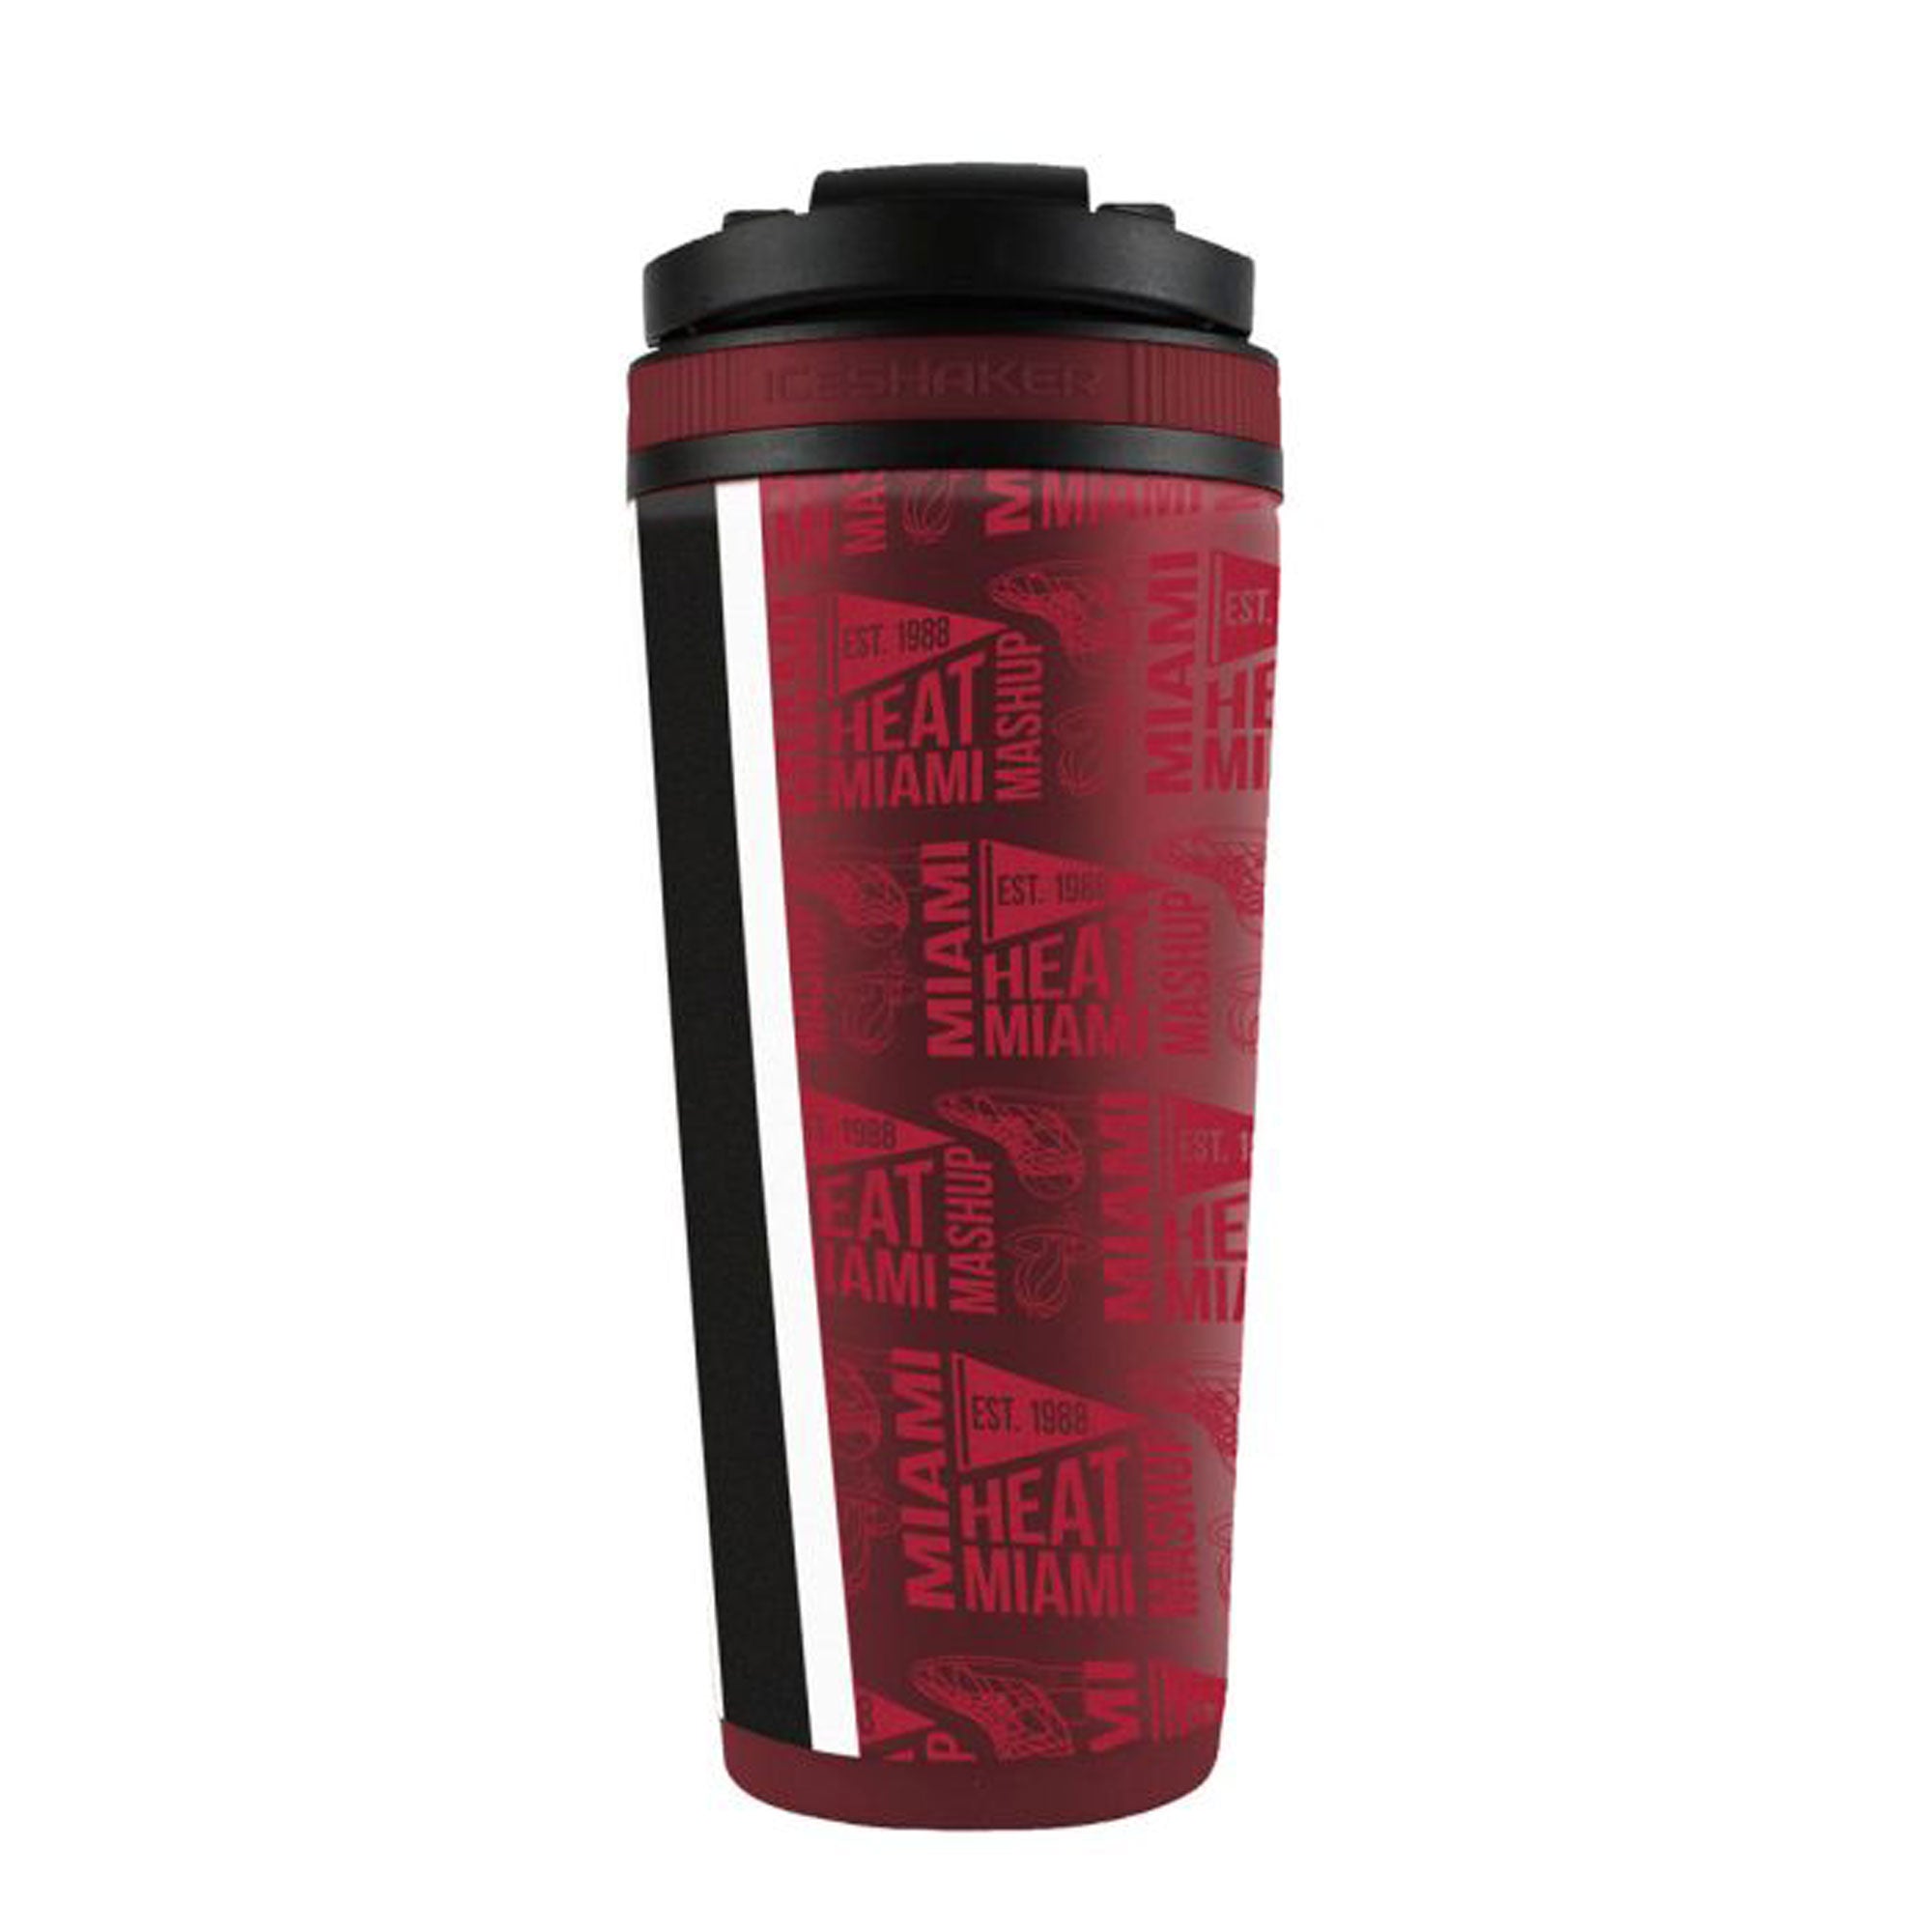 Officially Licensed Miami Heat 4D Ice Shaker